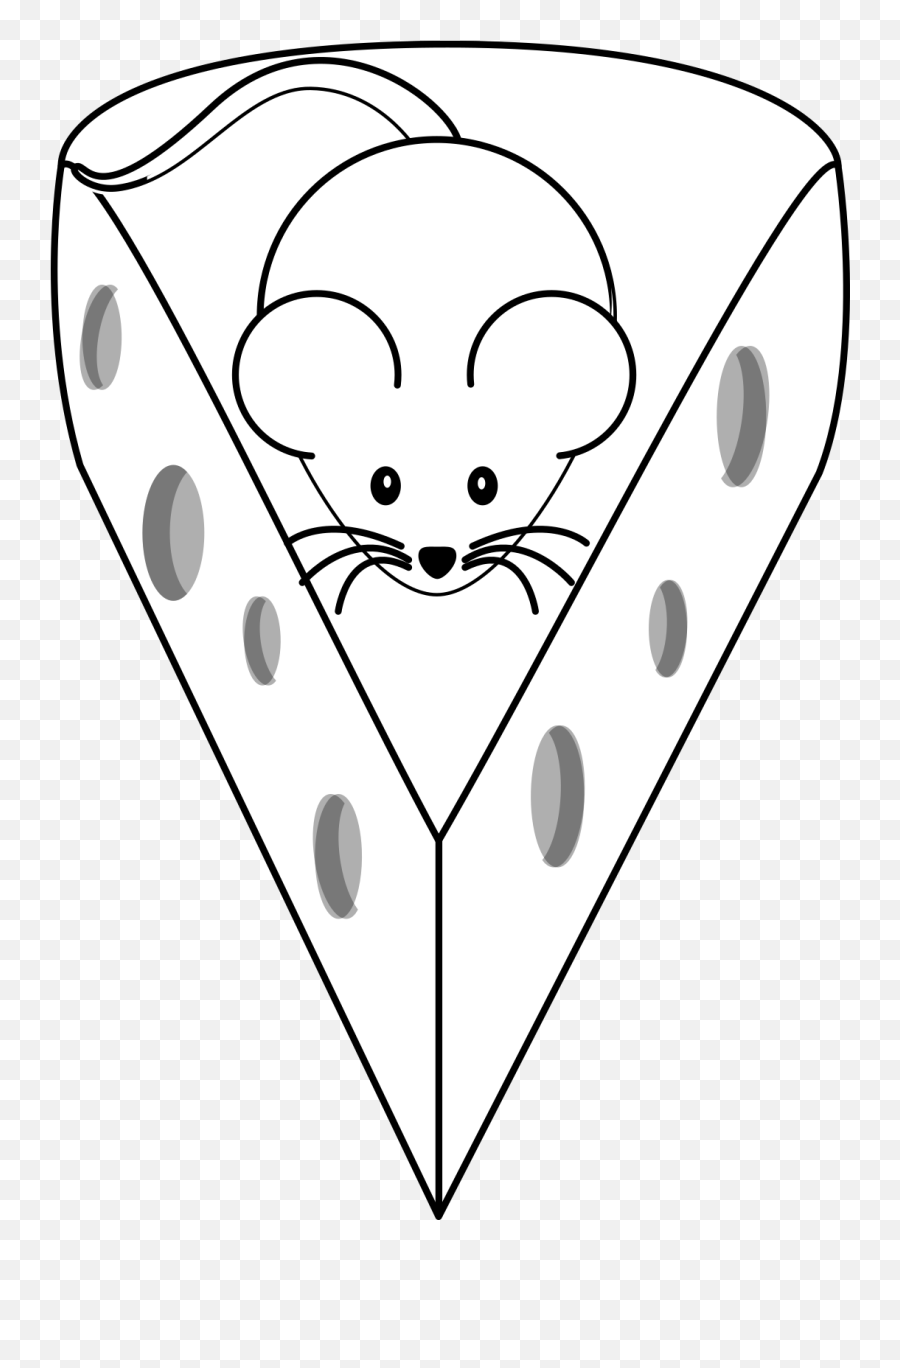 Black And White Mouse And Cheese Svg Vector Black And White - Cheese Emoji,Shamrock Clipart Black And White